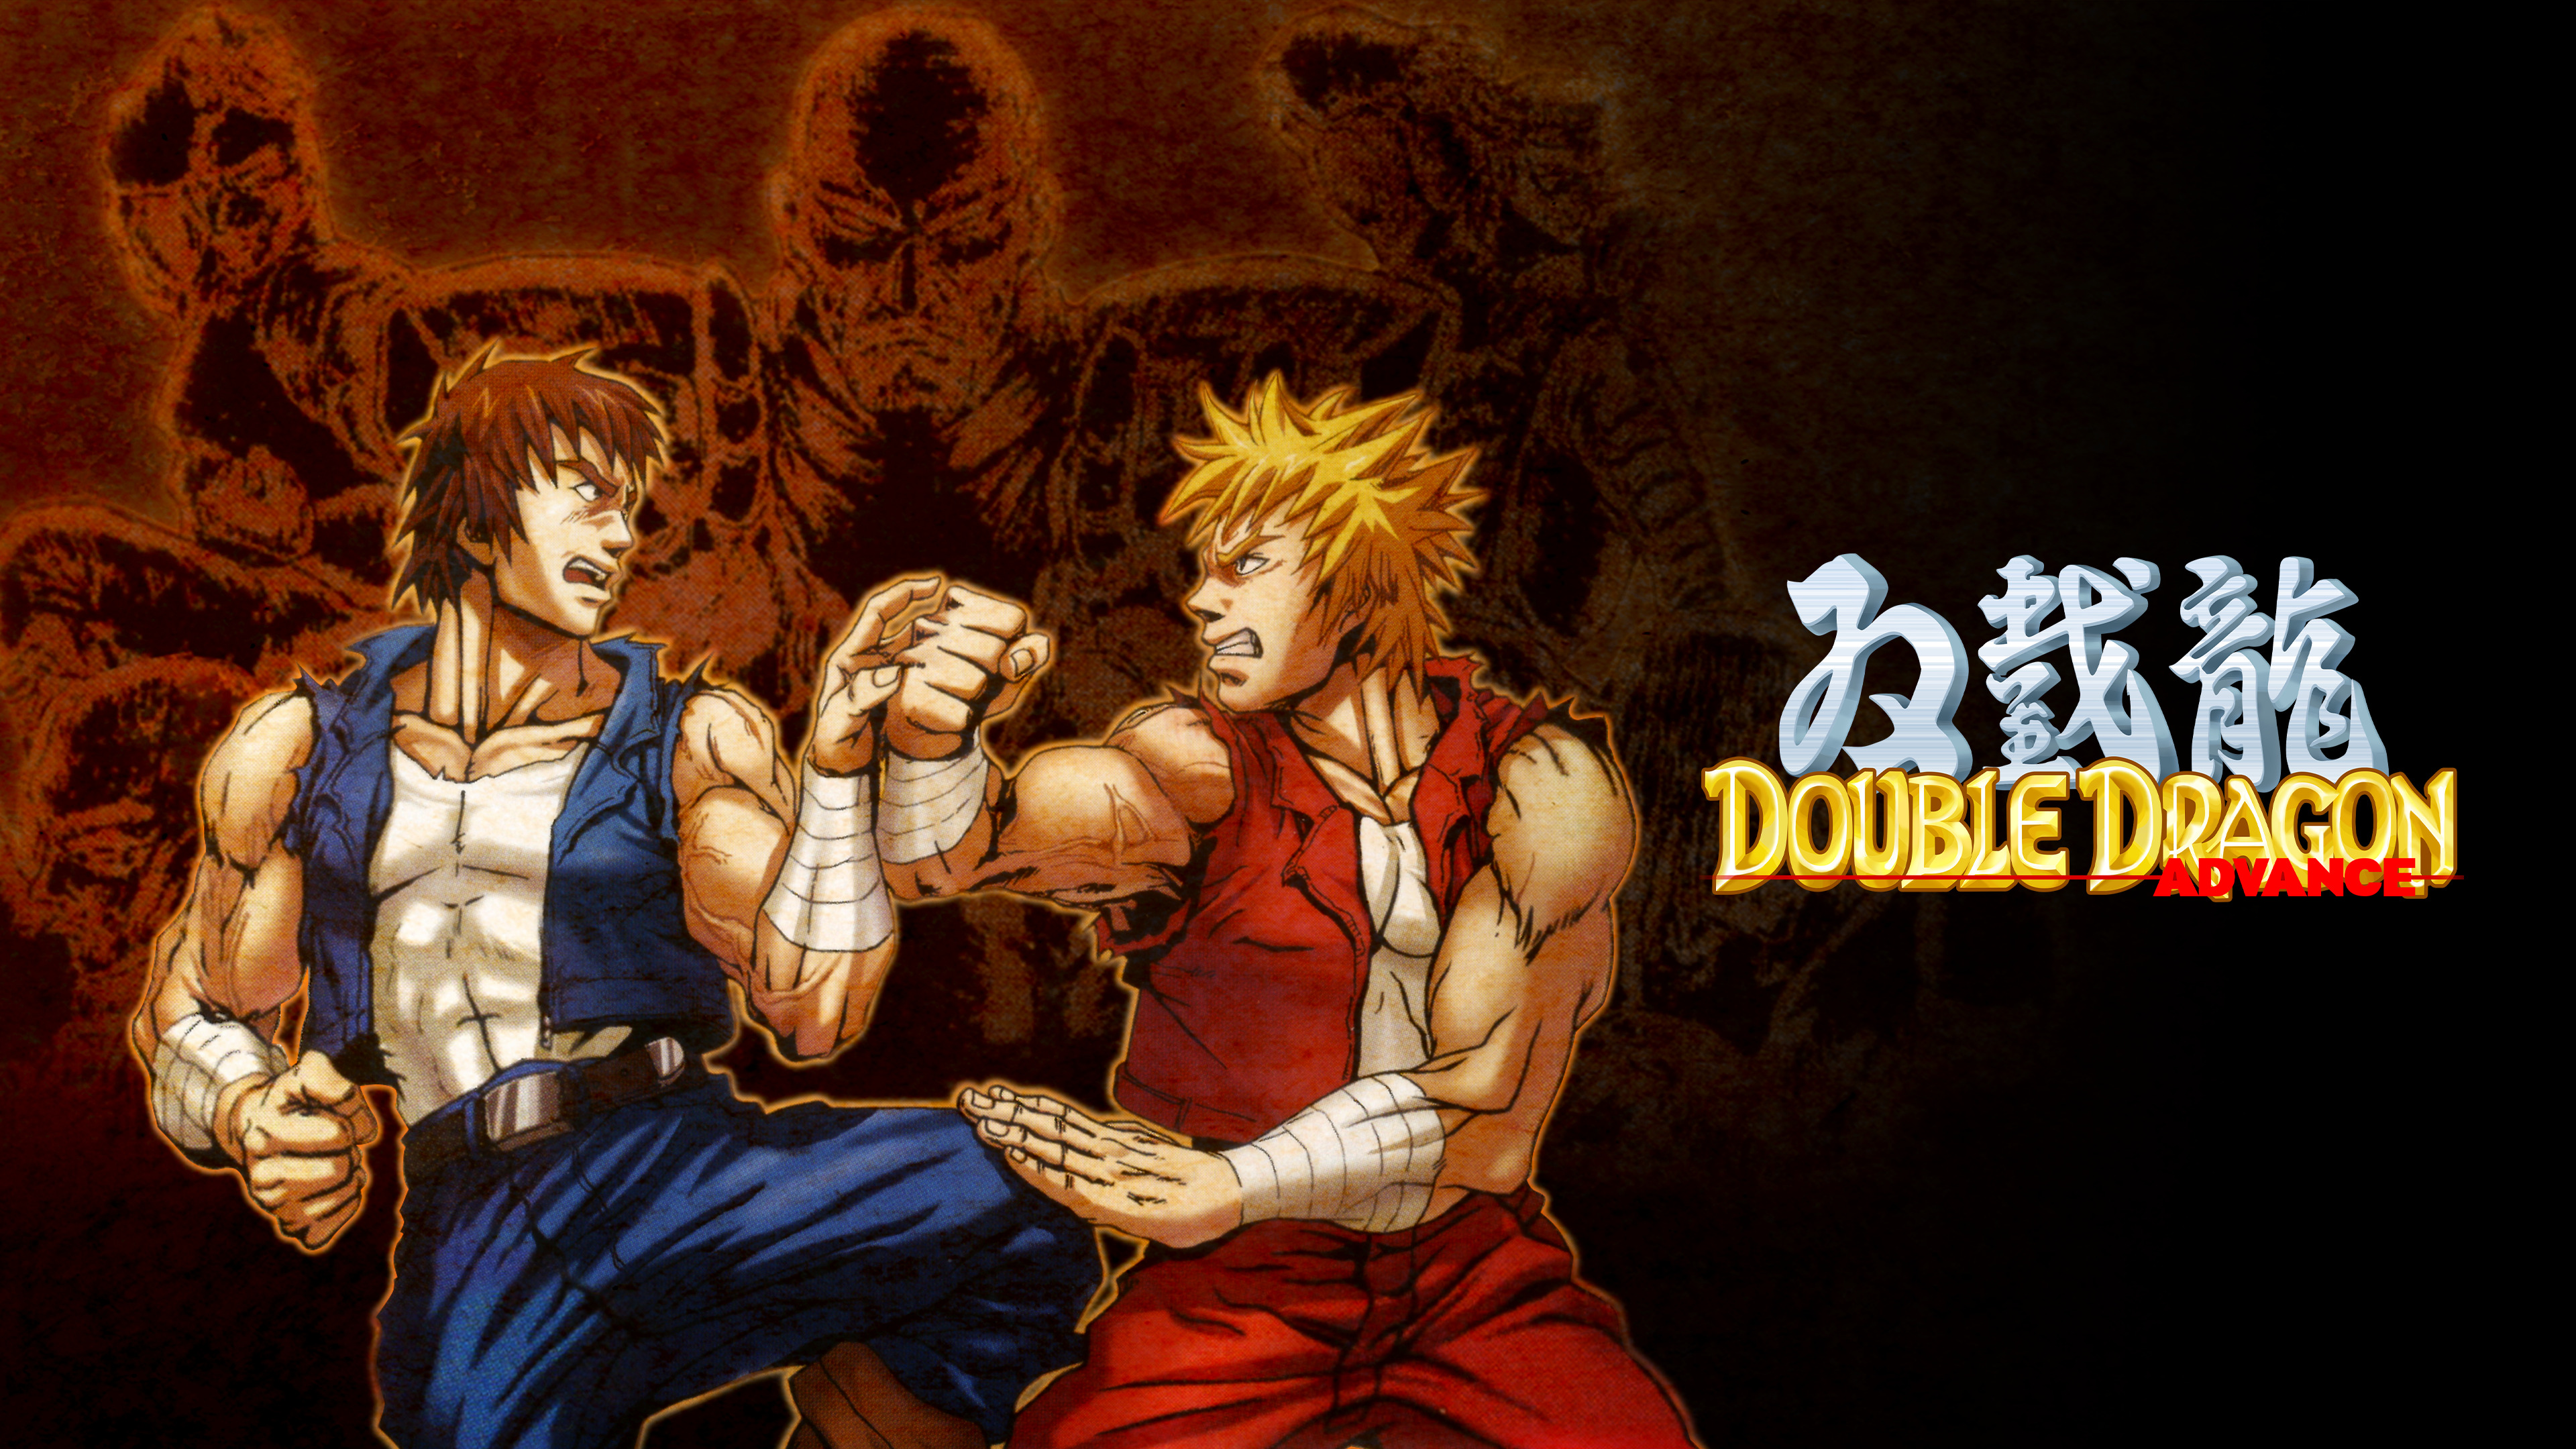 Double Dragon Collection Switch physical release pre-orders